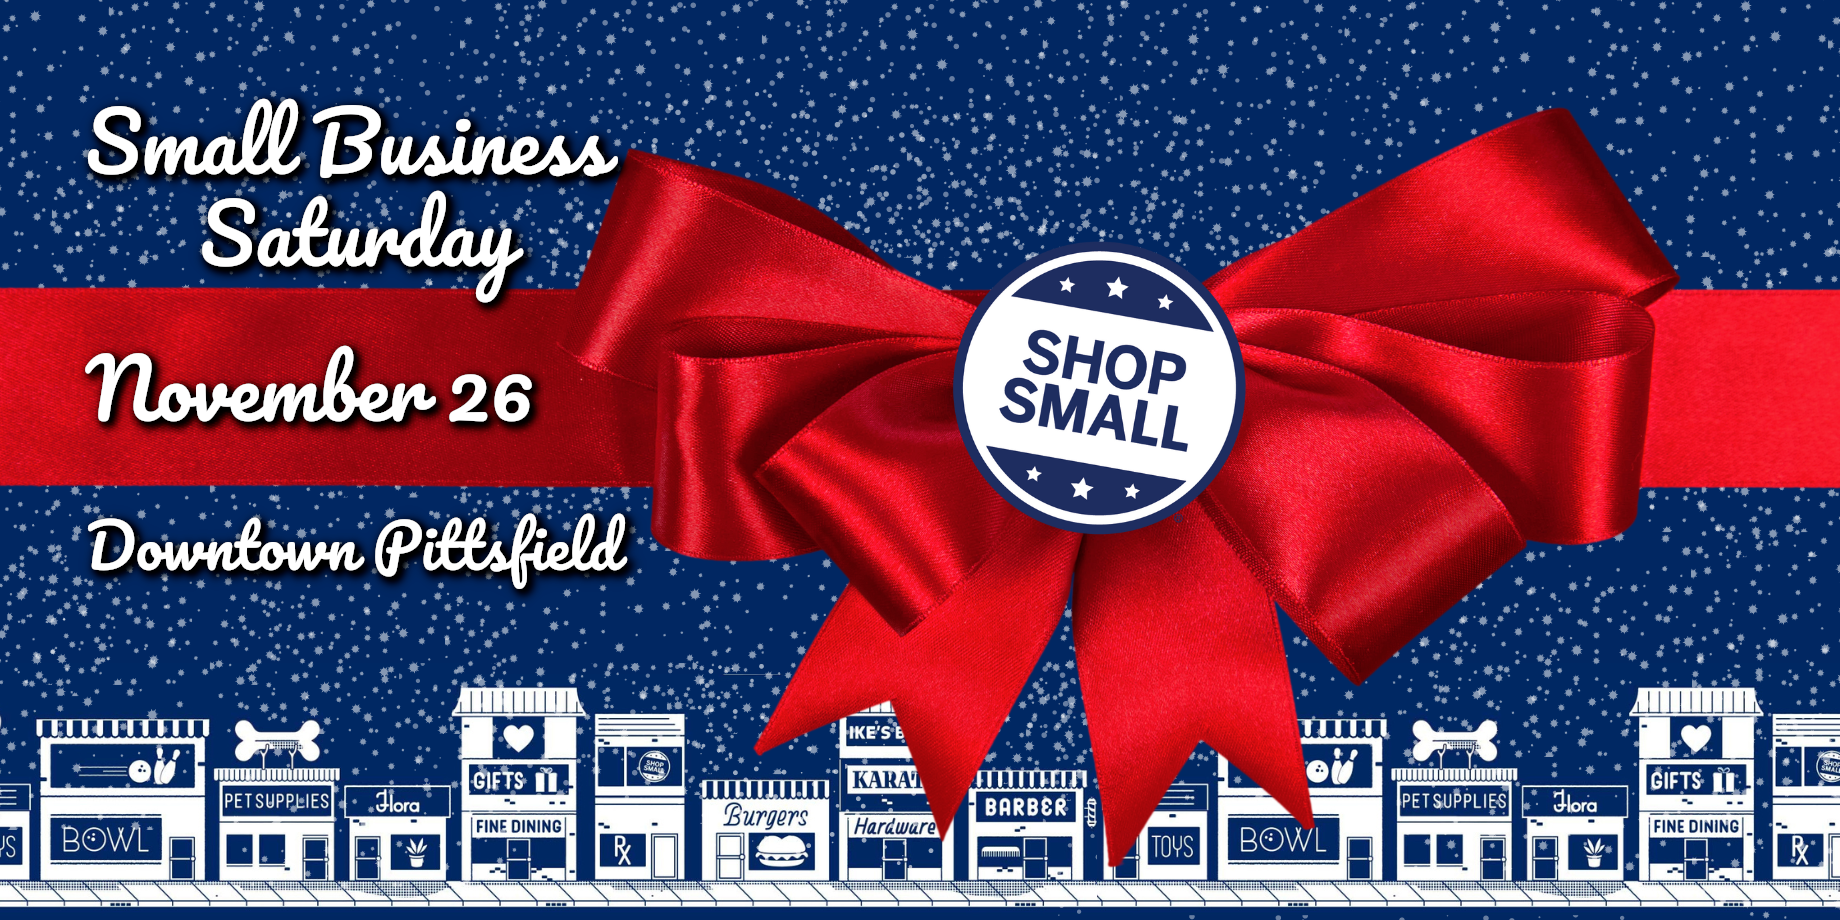 Sock Dreams on X: Shop Small Business Saturday is today! Our